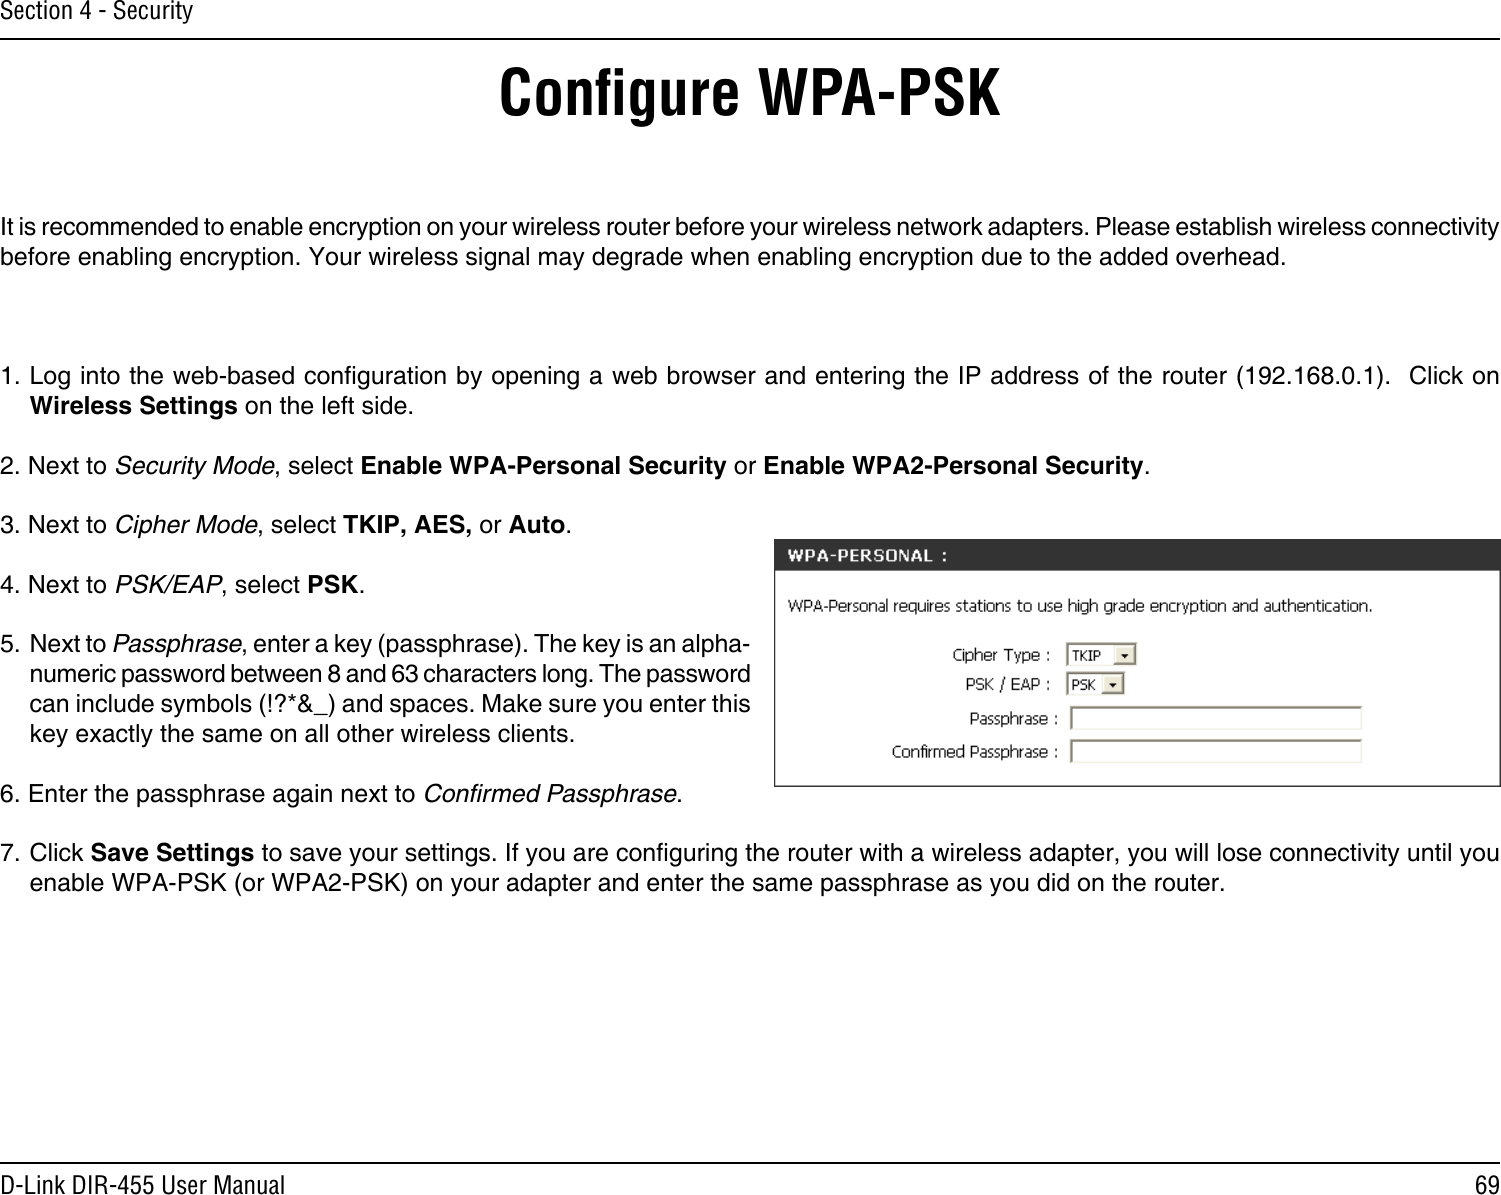 69D-Link DIR-455 User ManualSection 4 - SecurityConﬁgure WPA-PSKIt is recommended to enable encryption on your wireless router before your wireless network adapters. Please establish wireless connectivity before enabling encryption. Your wireless signal may degrade when enabling encryption due to the added overhead.1. Log into the web-based conguration by opening a web browser and entering the IP address of the router (192.168.0.1).  Click on Wireless Settings on the left side.2. Next to Security Mode, select Enable WPA-Personal Security or Enable WPA2-Personal Security.3. Next to Cipher Mode, select TKIP, AES, or Auto.4. Next to PSK/EAP, select PSK.5. Next to Passphrase, enter a key (passphrase). The key is an alpha-numeric password between 8 and 63 characters long. The password can include symbols (!?*&amp;_) and spaces. Make sure you enter this key exactly the same on all other wireless clients.6. Enter the passphrase again next to Conﬁrmed Passphrase.7. Click Save Settings to save your settings. If you are conguring the router with a wireless adapter, you will lose connectivity until you enable WPA-PSK (or WPA2-PSK) on your adapter and enter the same passphrase as you did on the router.